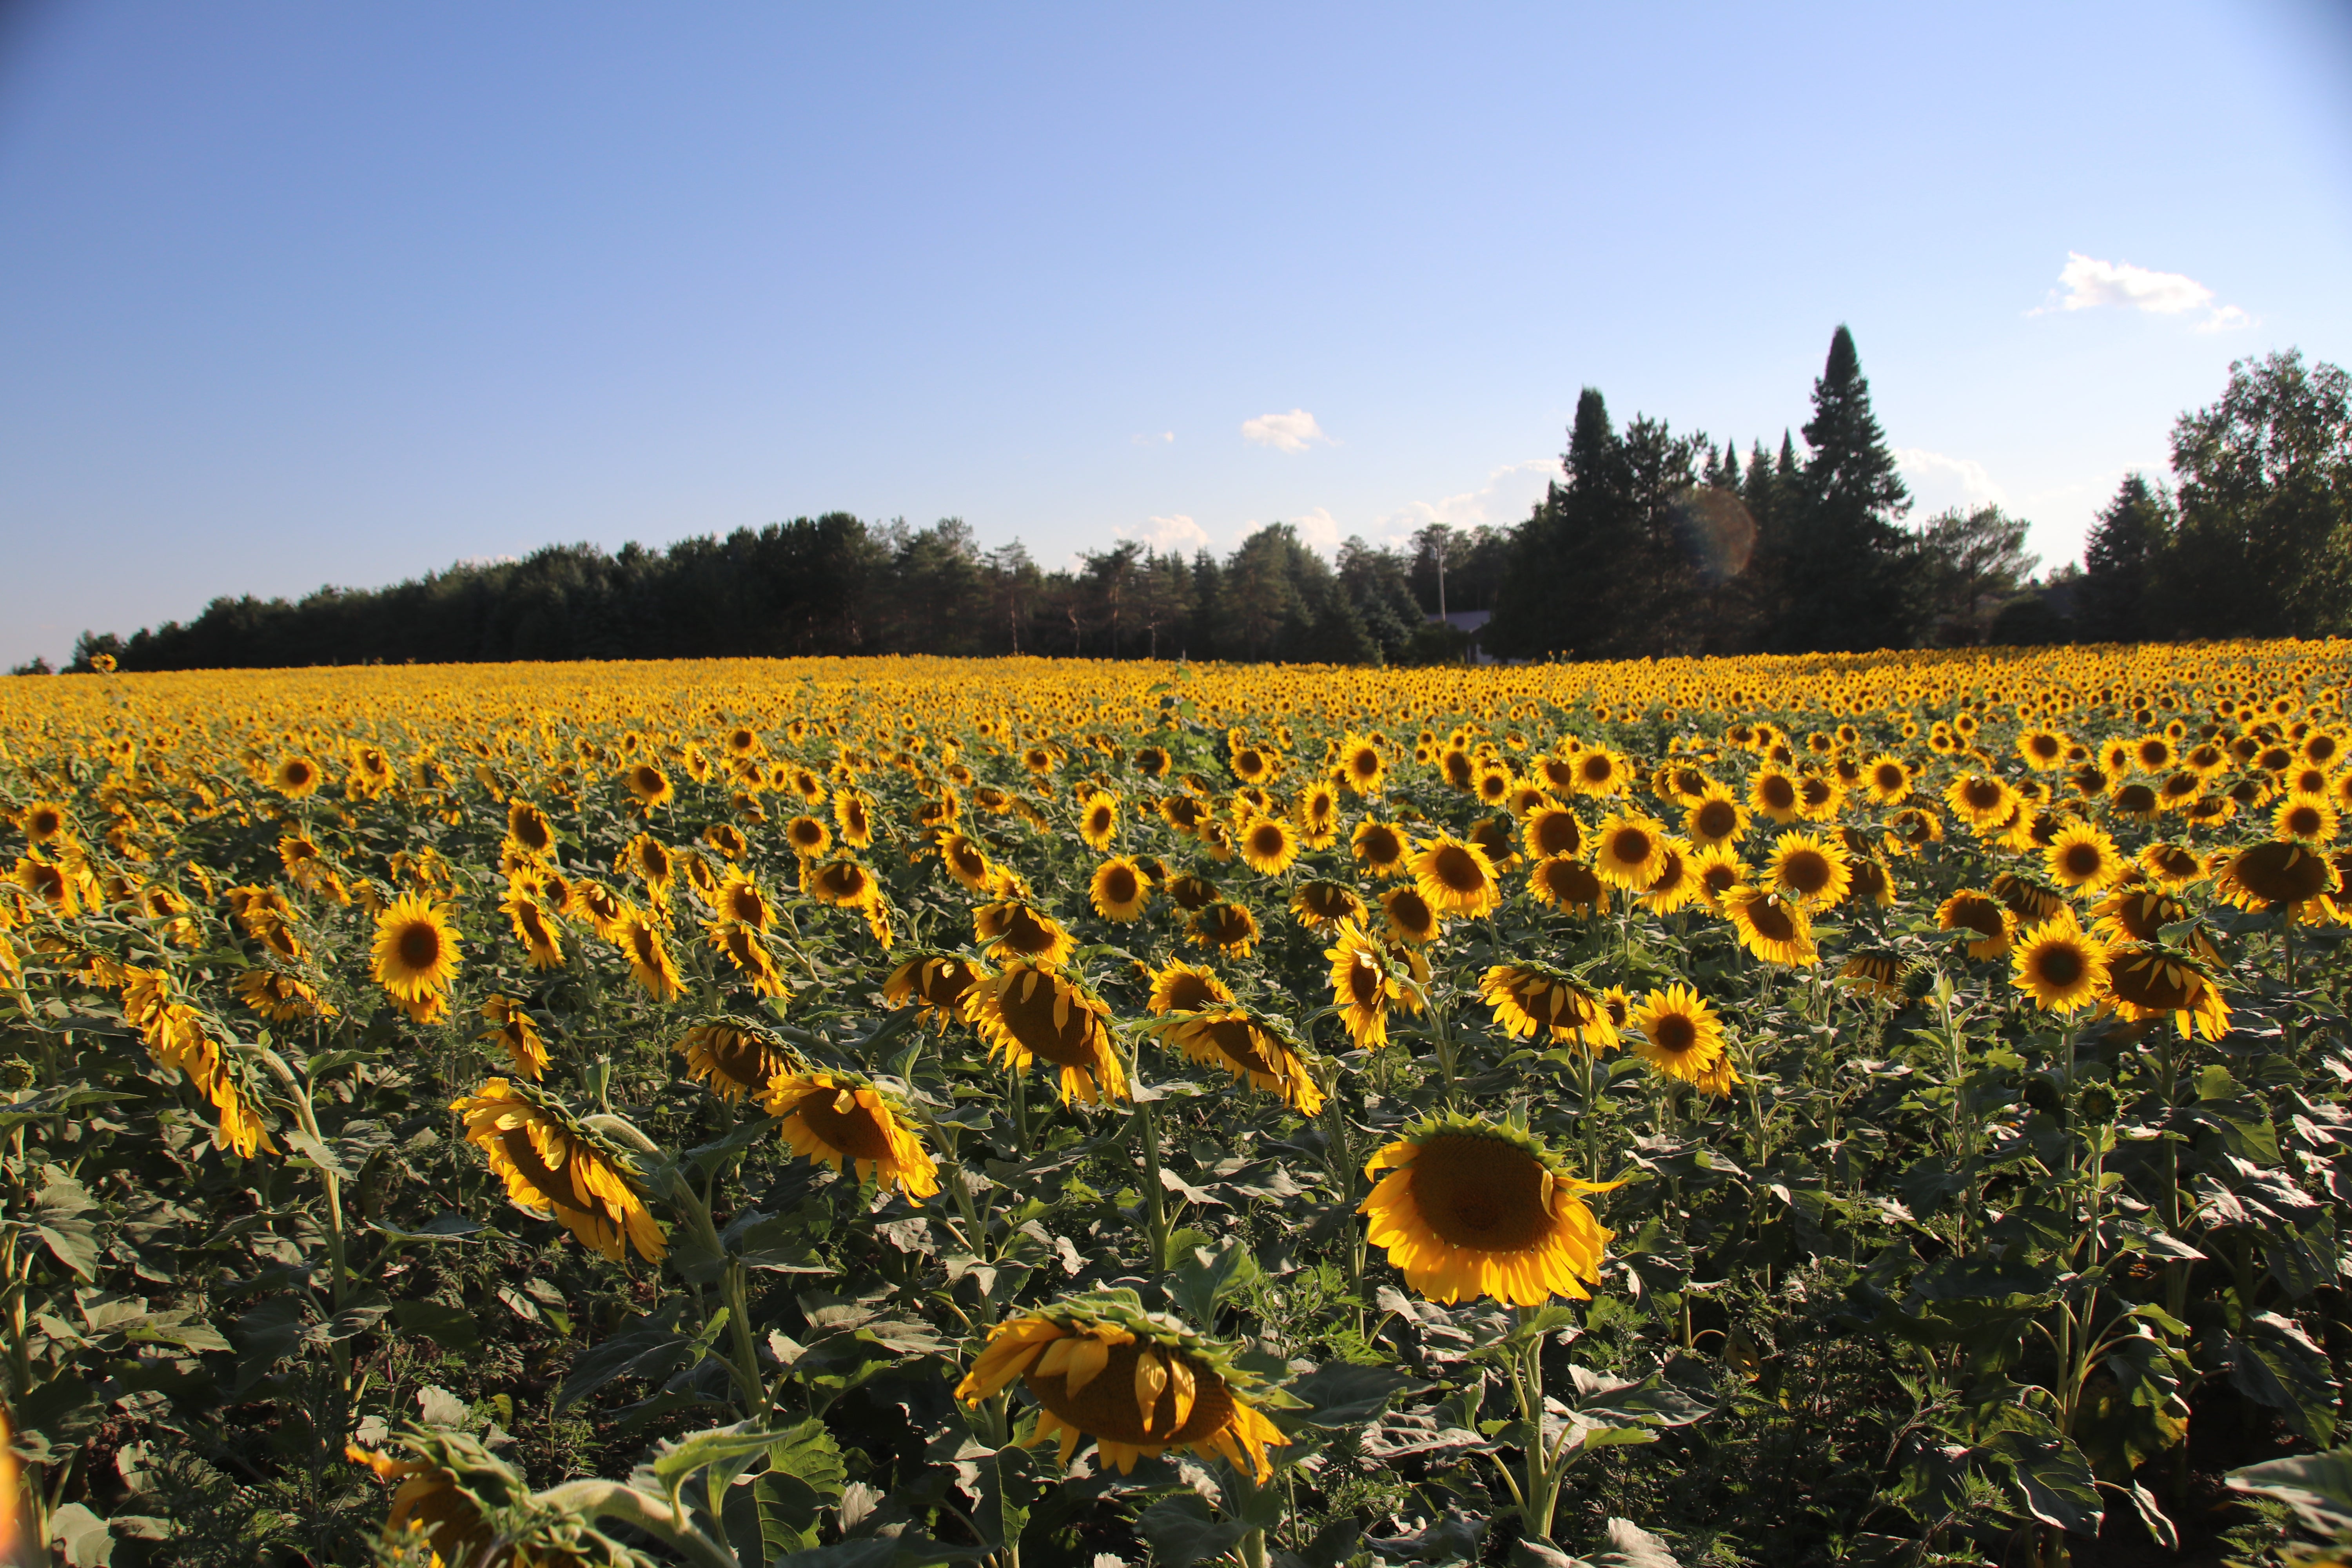 The sunflower farm we ran across while out driving. Wish I could remember exactly where it was.